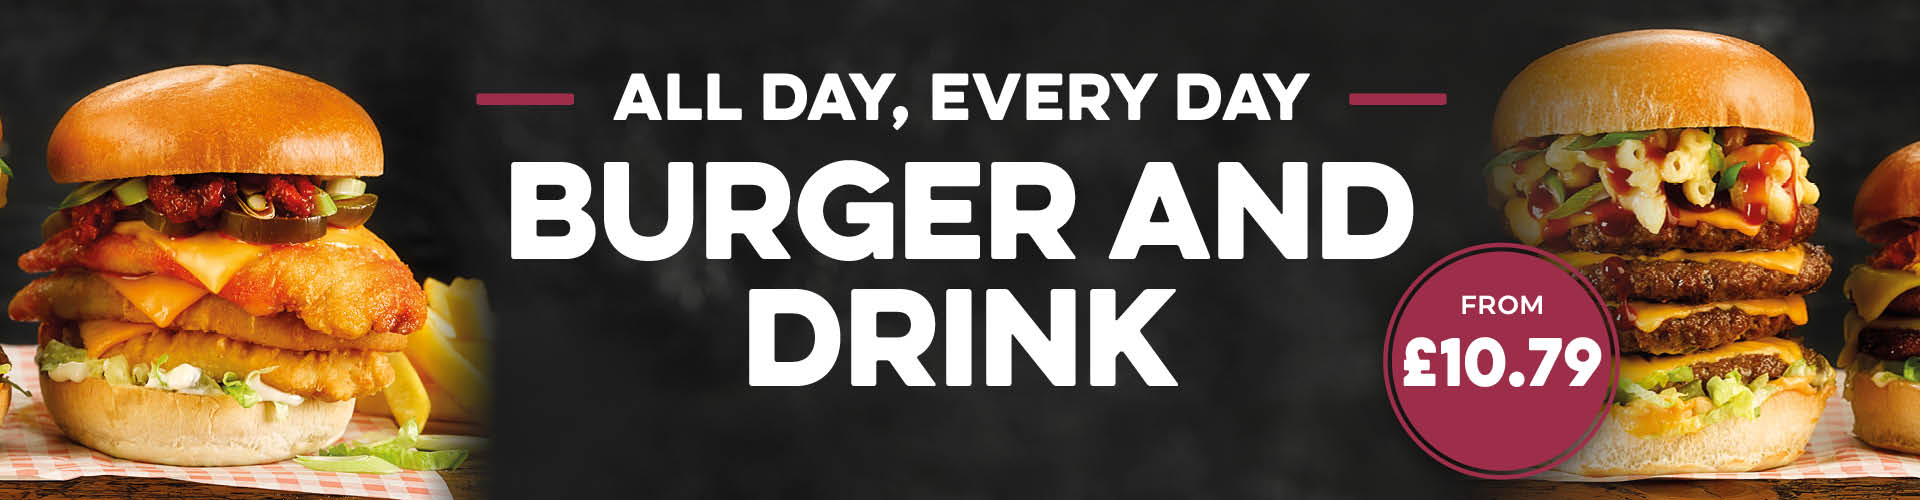 Enjoy a burger and a drink for £10.79